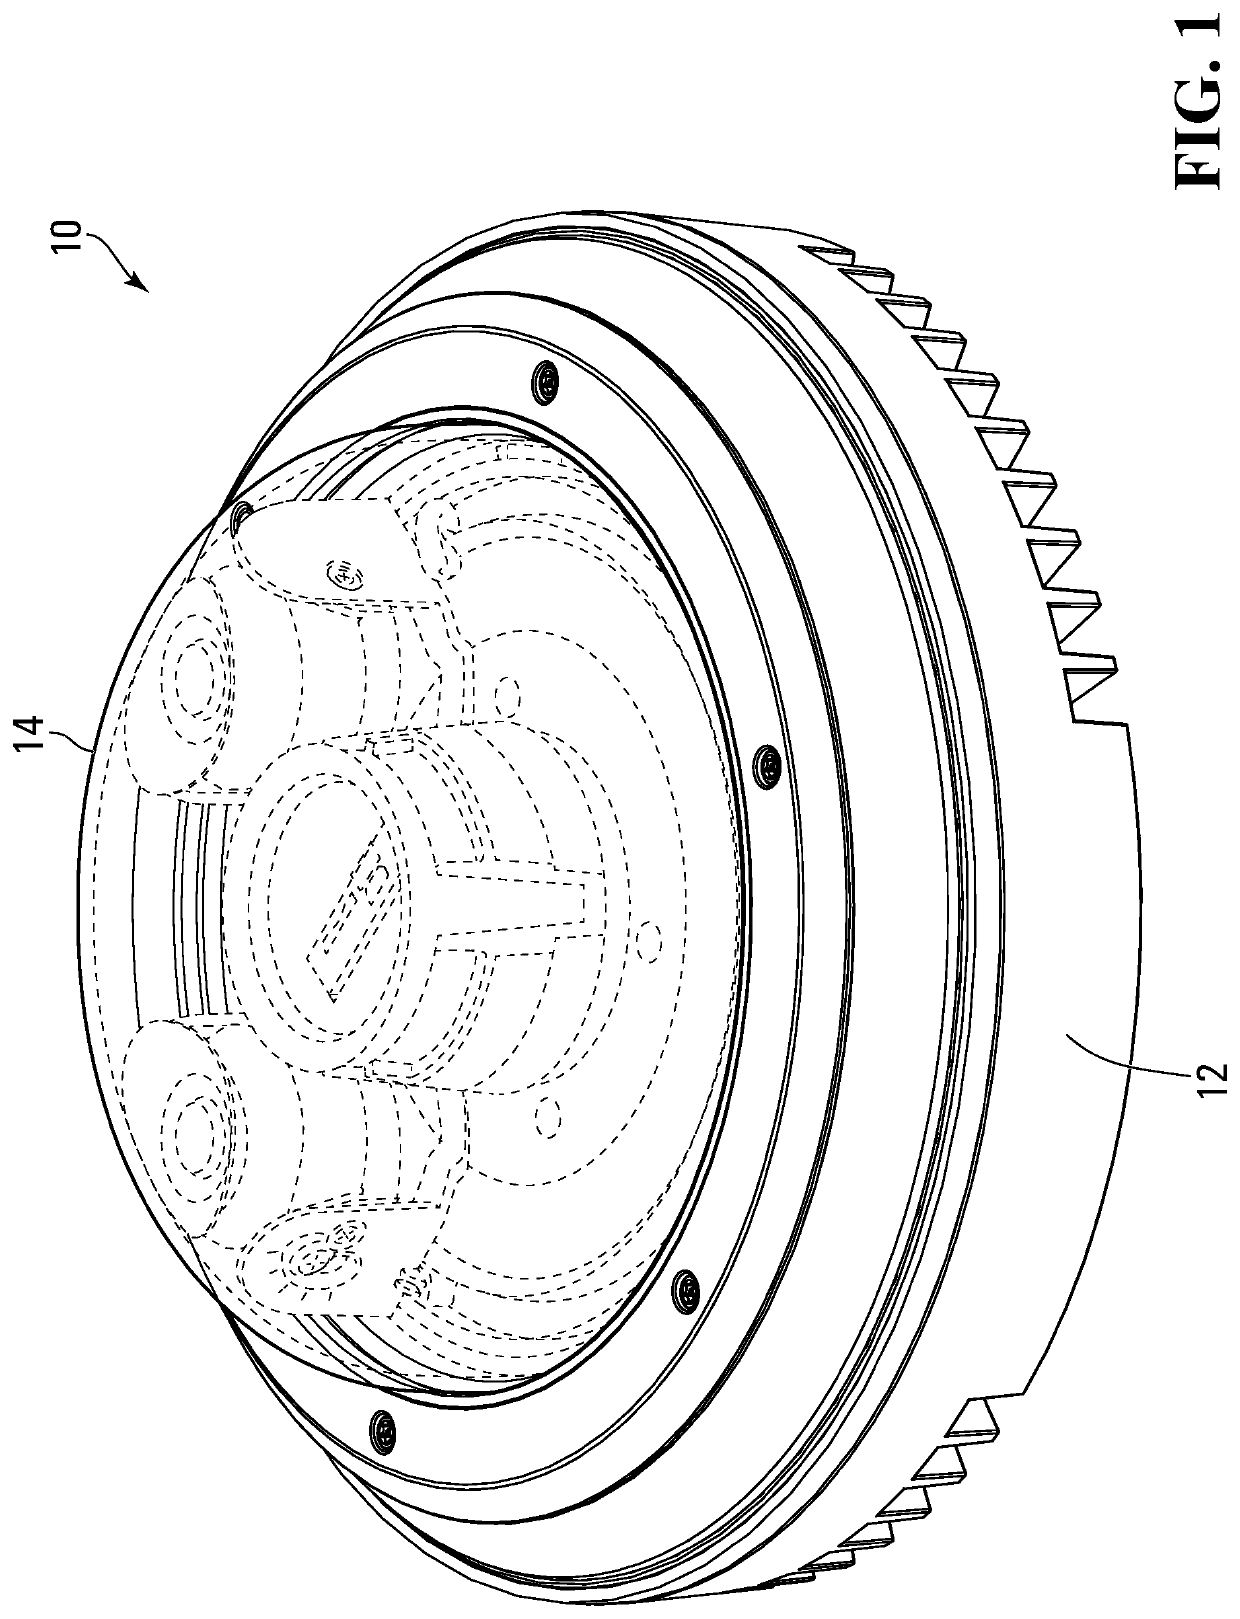 Gasket for a camera lens, and multi-headed camera